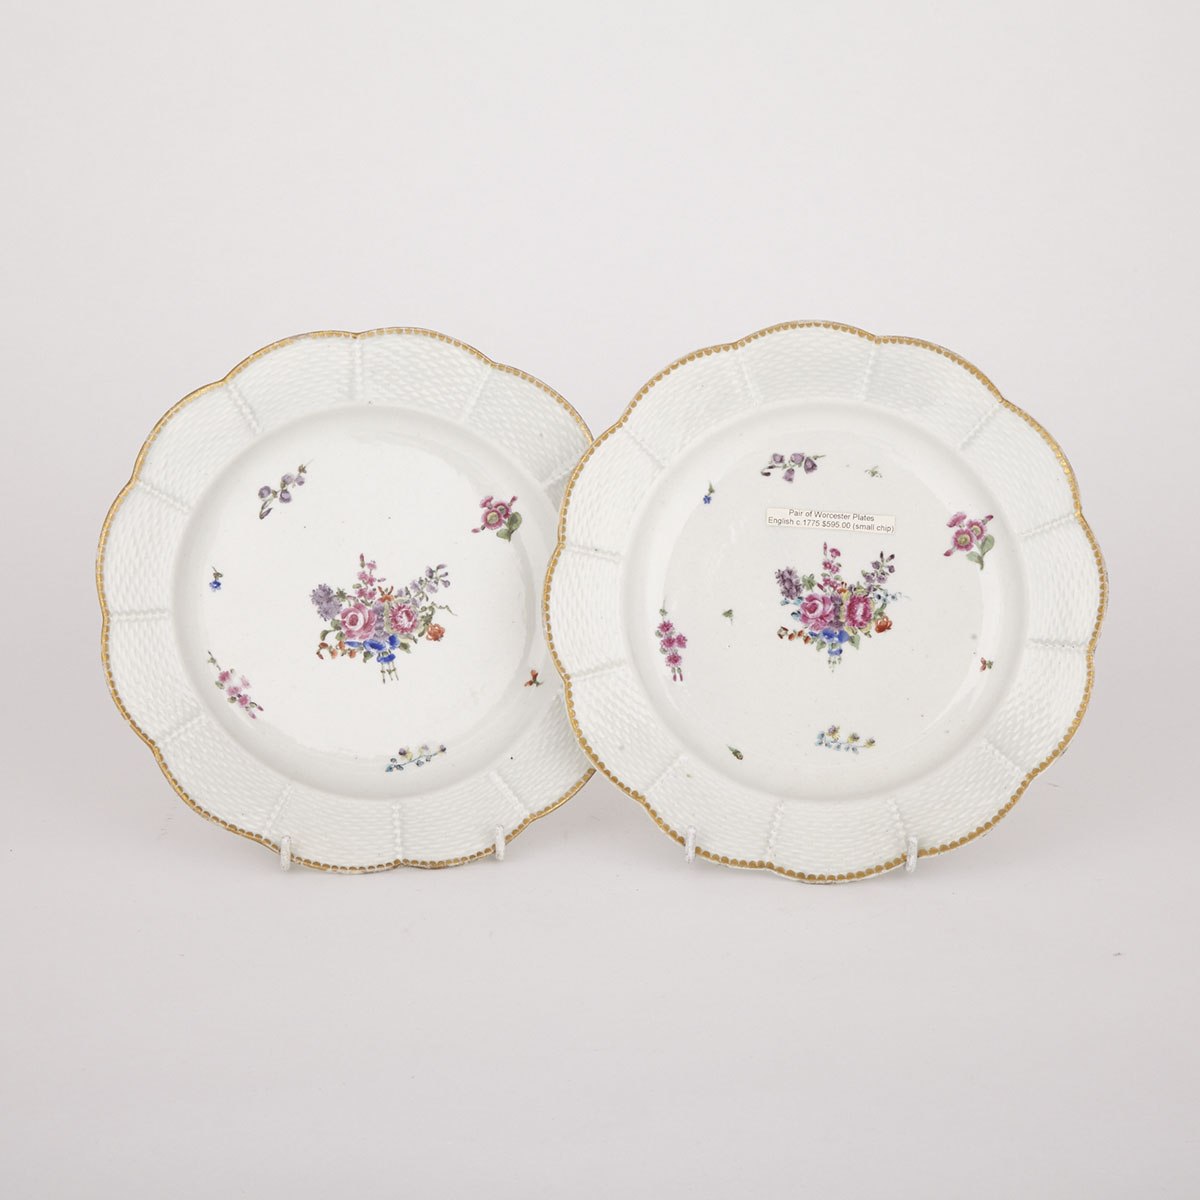 Pair of Worcester Moulded and Flower-Painted Plates, c.1775